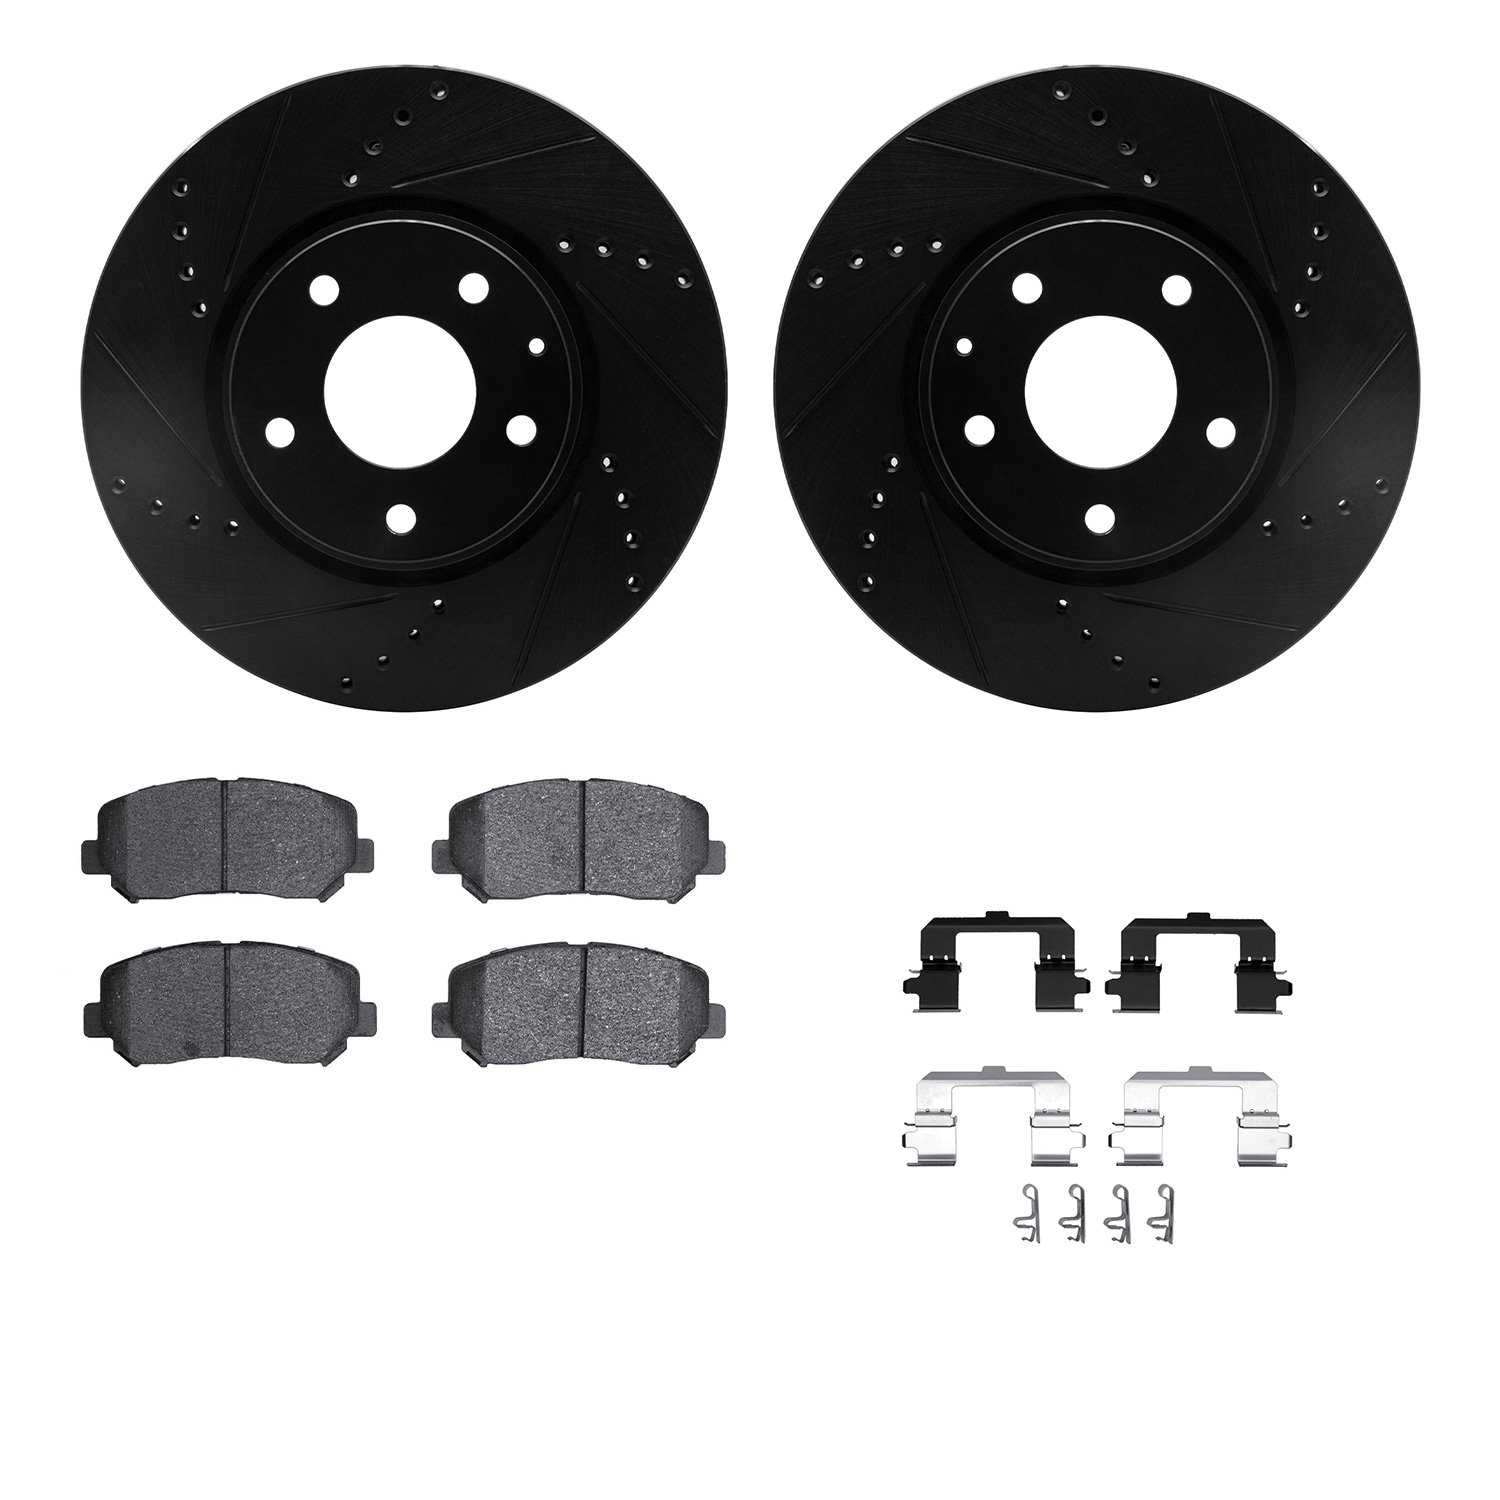 8312-80074 Drilled/Slotted Brake Rotors with 3000-Series Ceramic Brake Pads Kit & Hardware [Black], Fits Select Ford/Lincoln/Mer